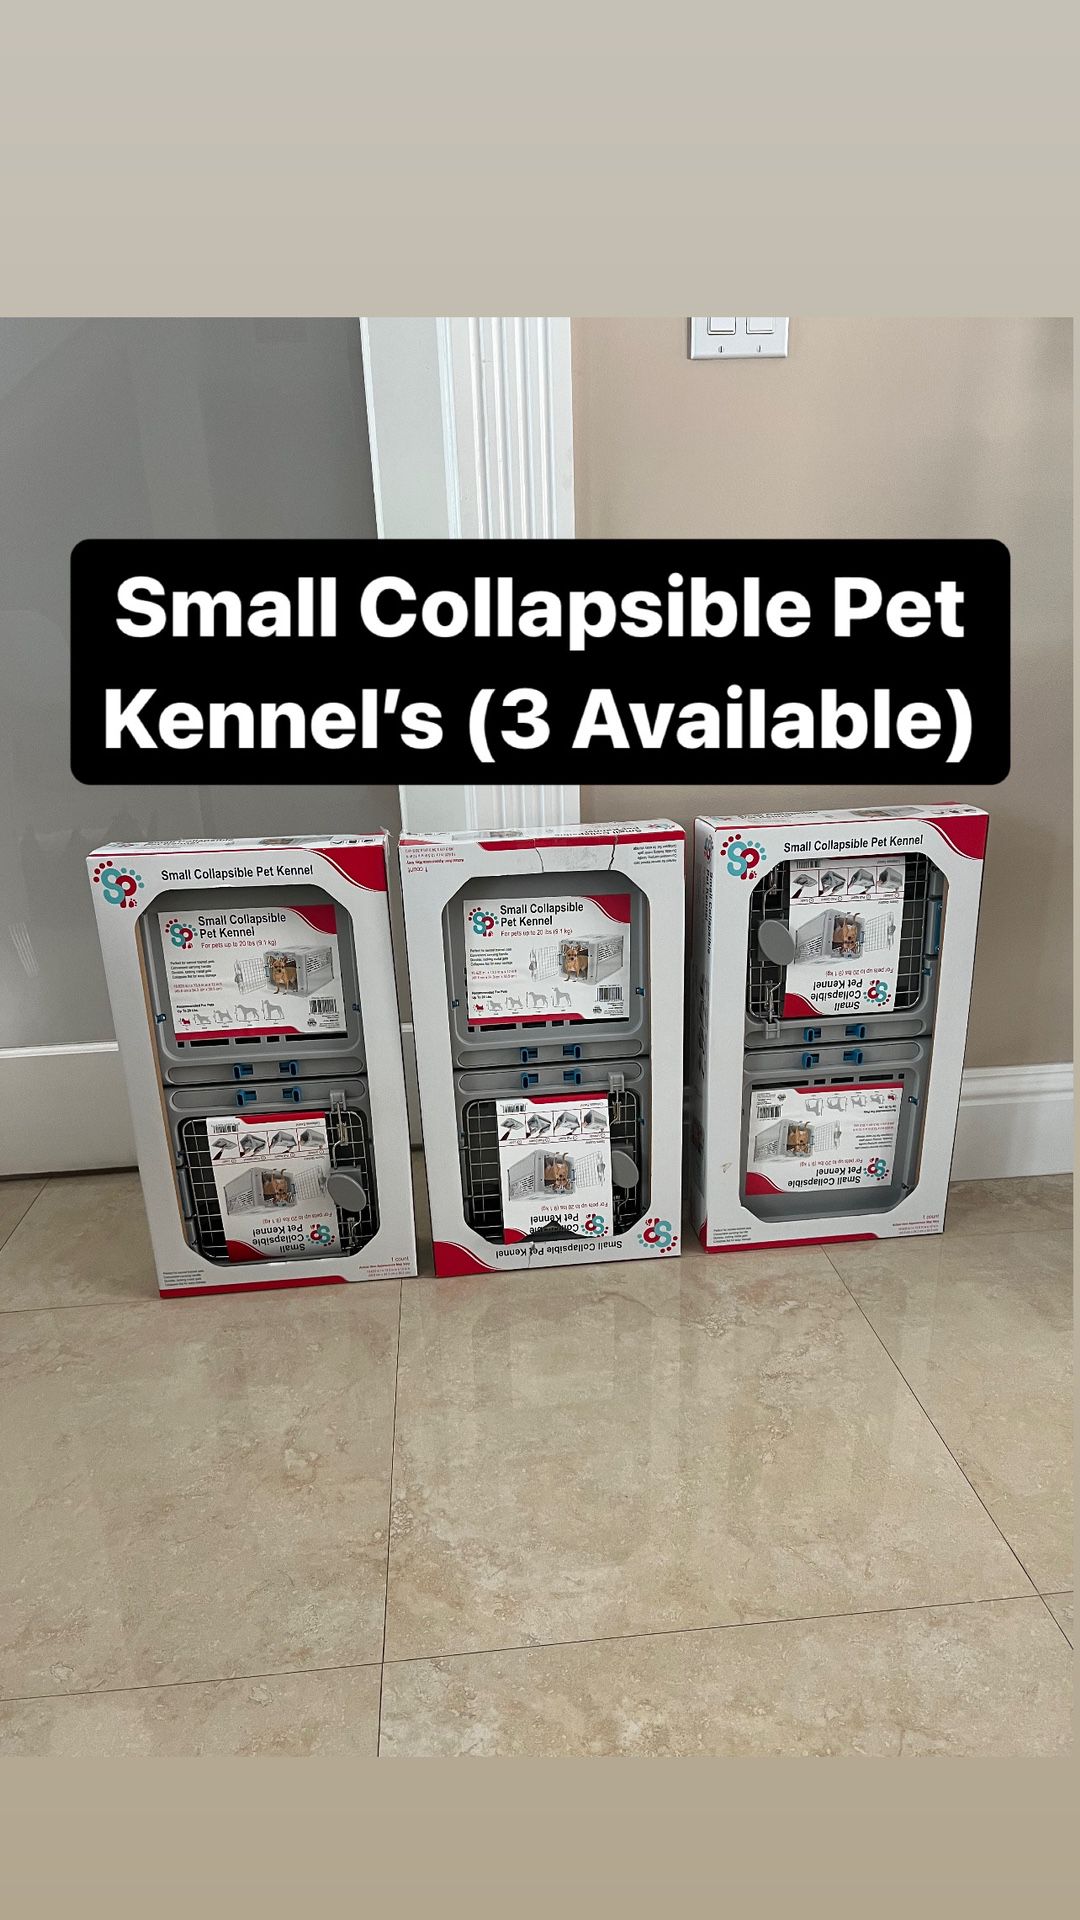 Brand New Small Collapsible Pet Kennels (3 Available) Pickup Today Available 